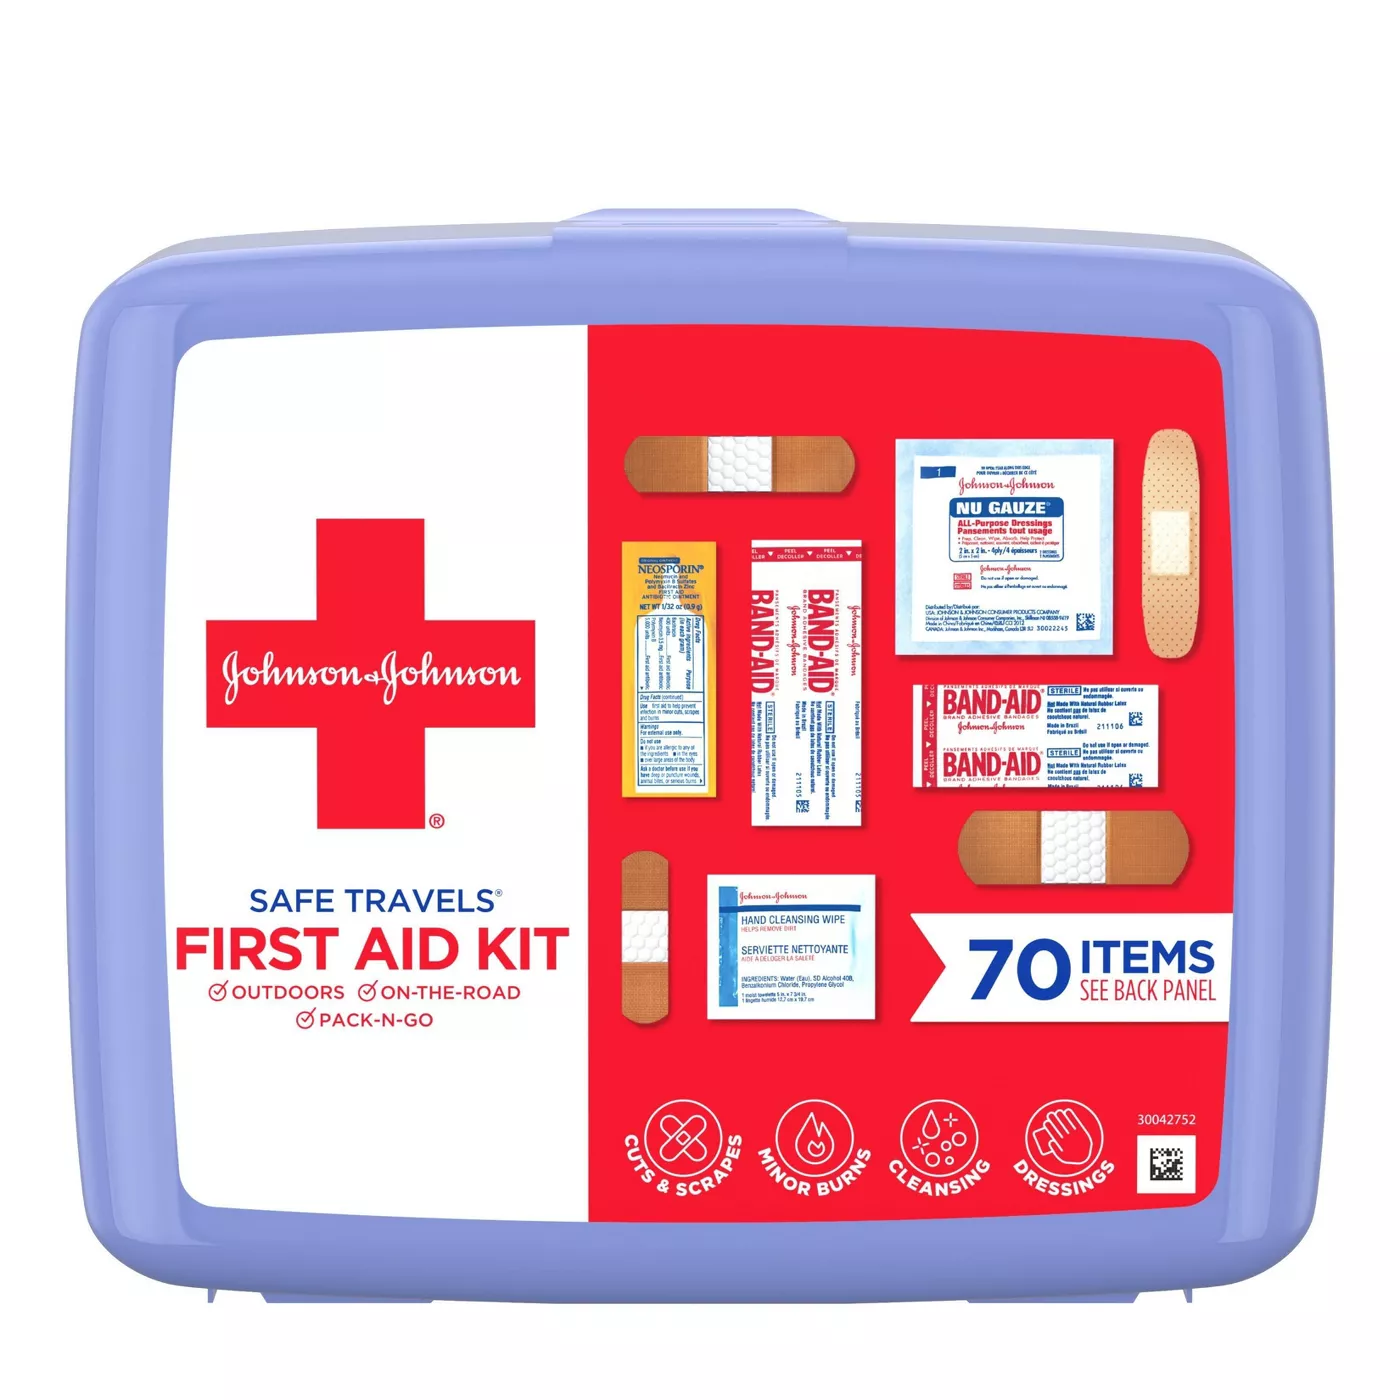 Johnson & Johnson Safe Travels First Aid Kit - 70 pc - image 1 of 11